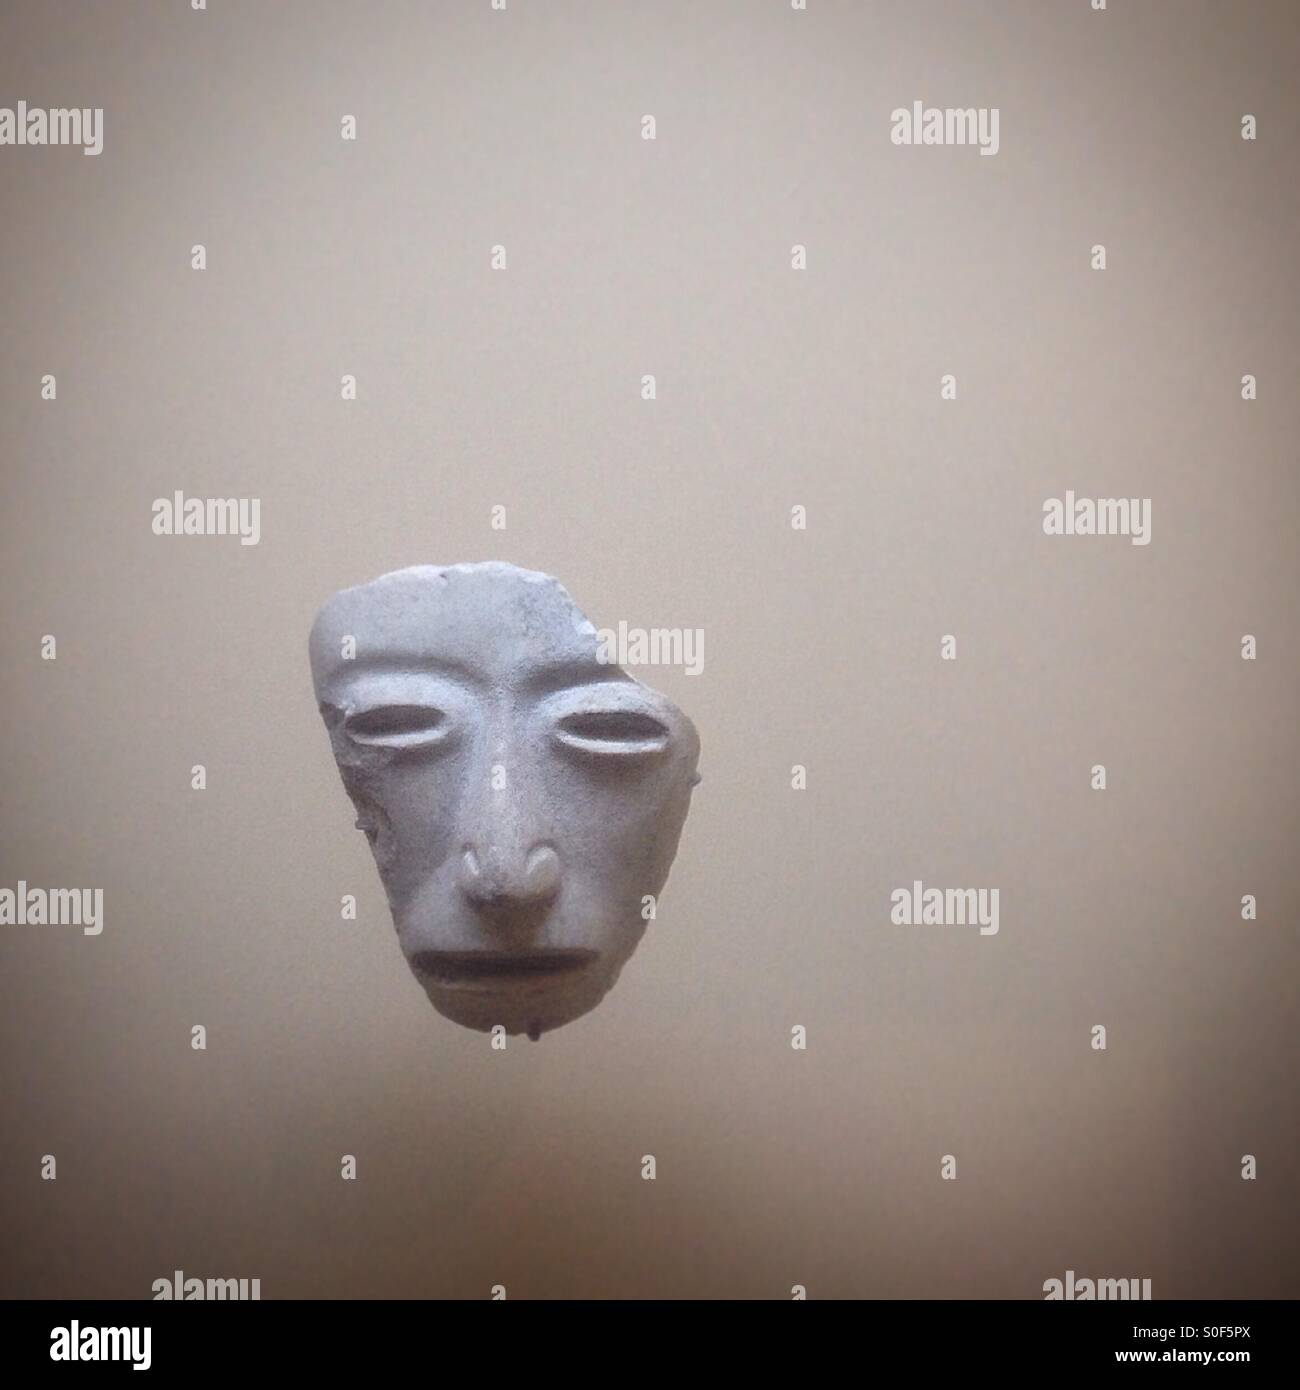 A Teotihuacan mask is displayed in the National Museum of Anthropology of Mexico City, Mexico Stock Photo